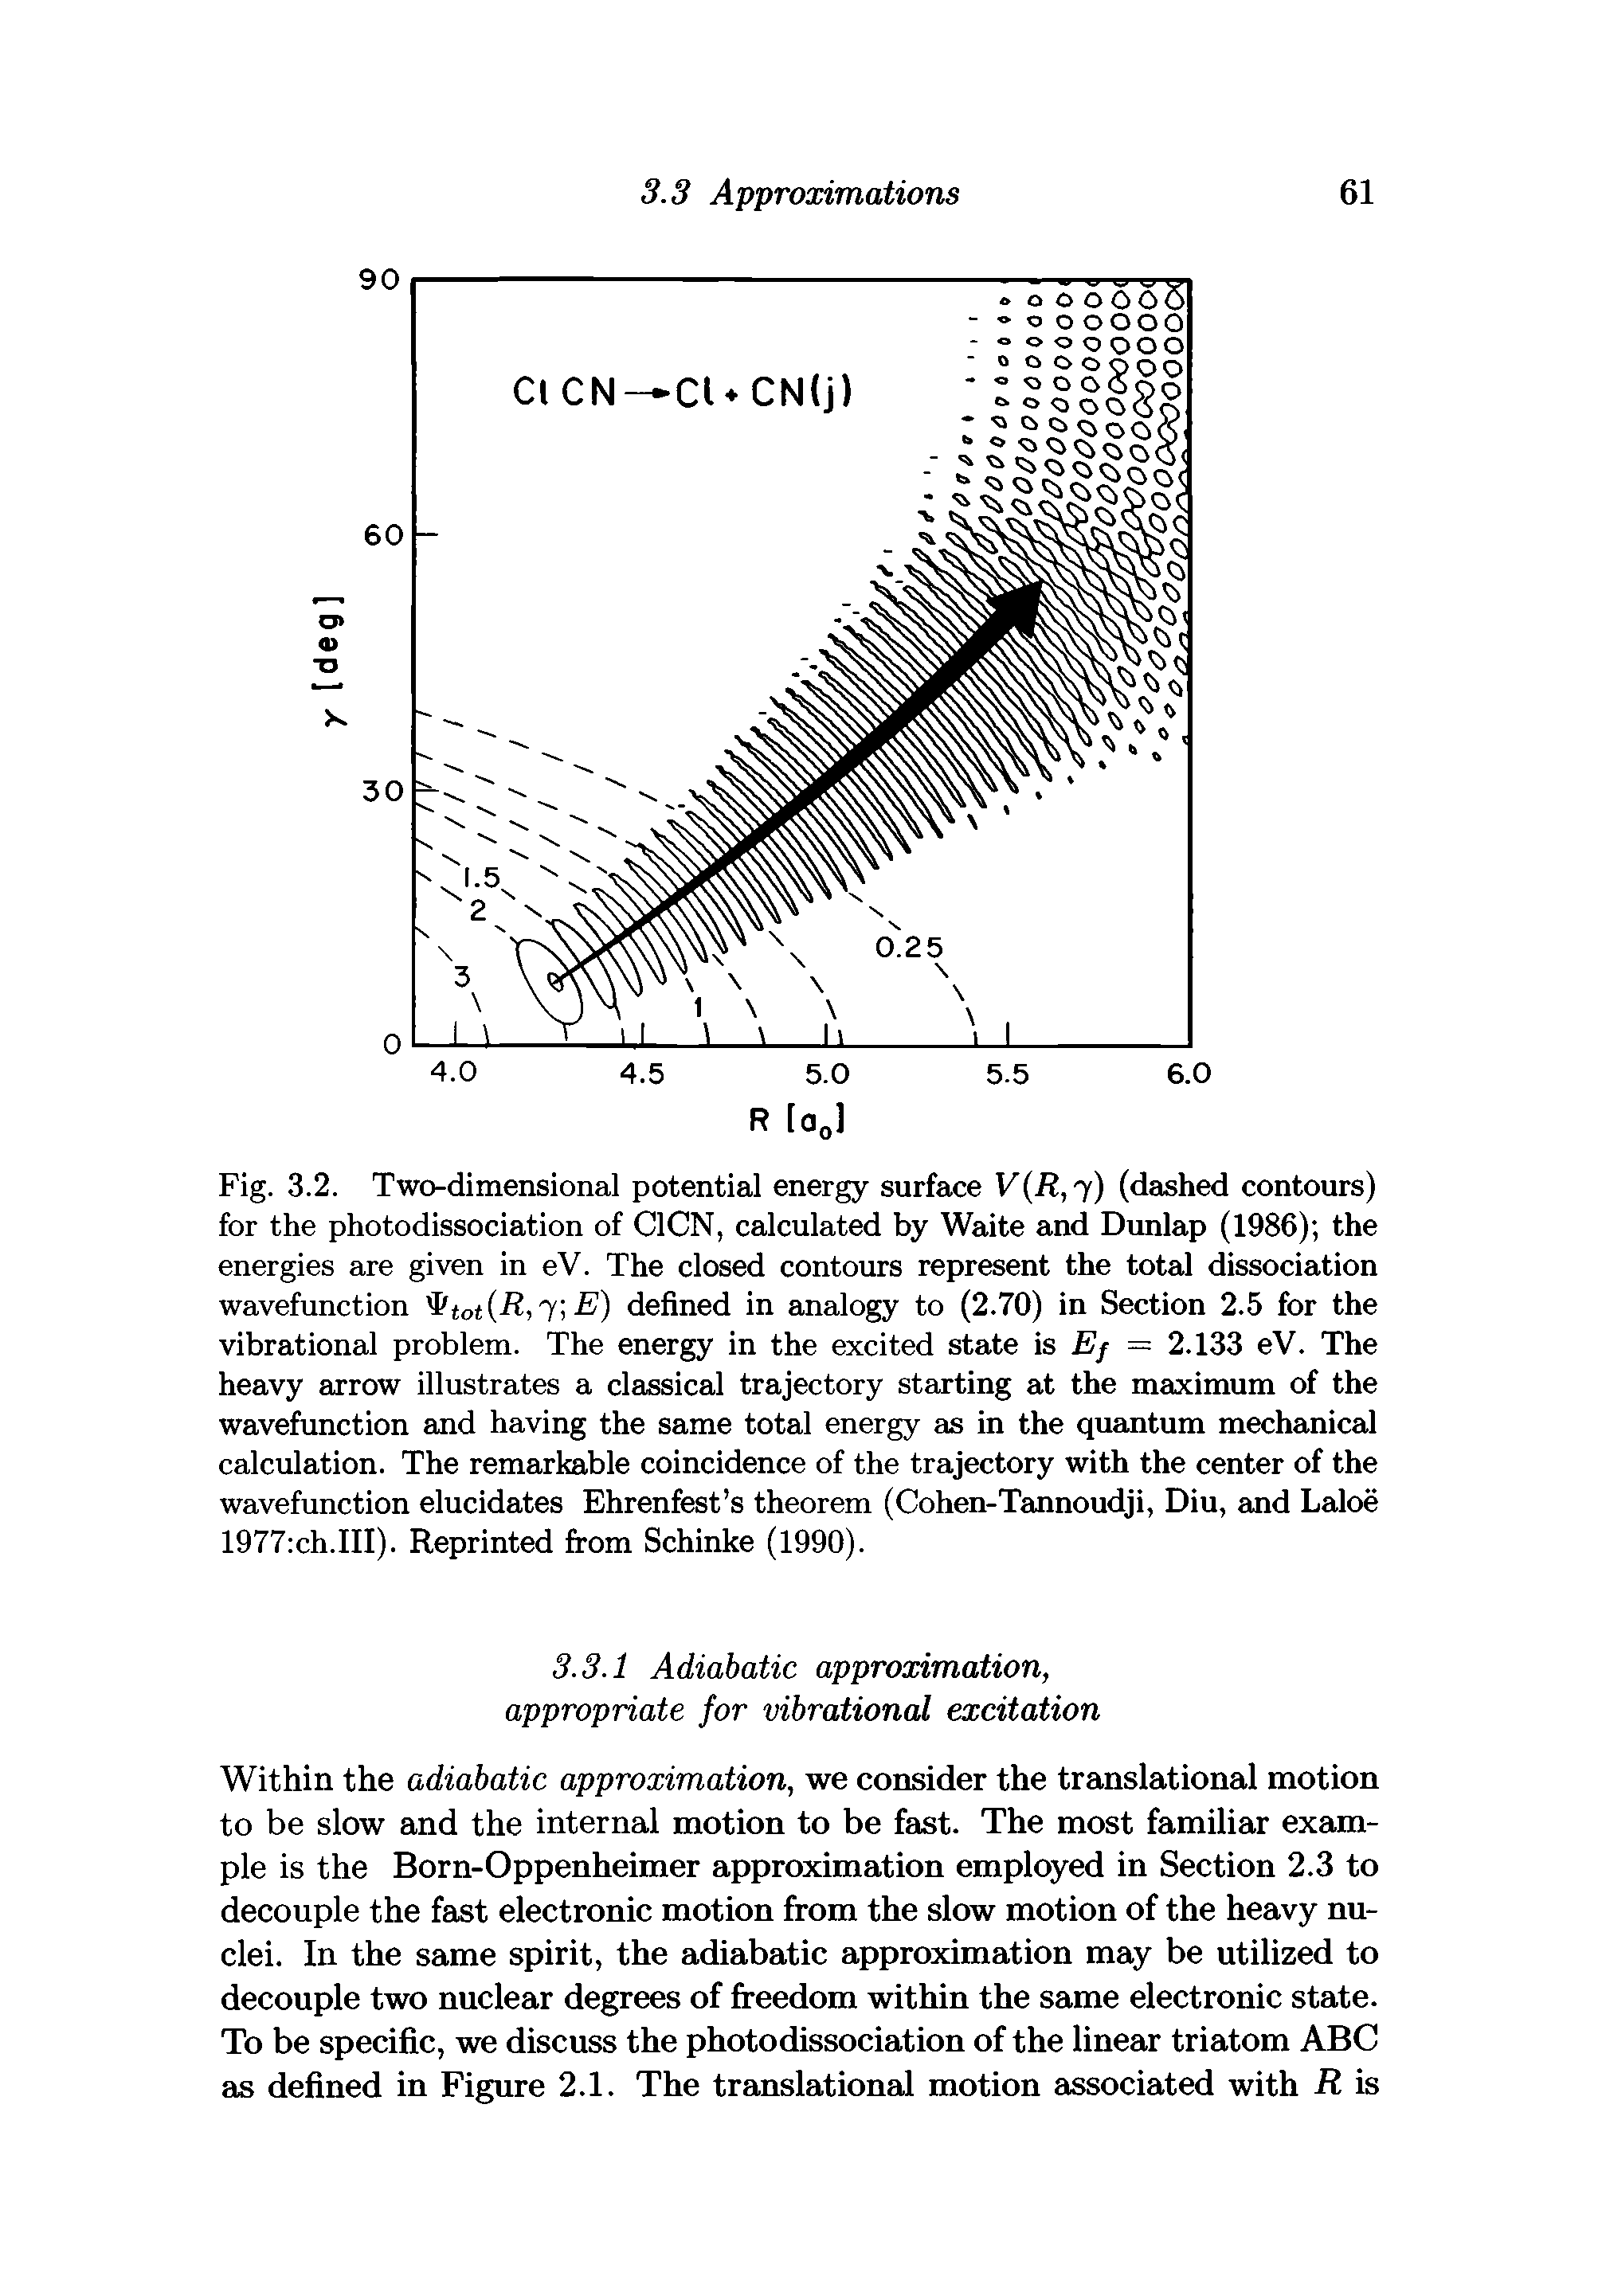 Fig. 3.2. Two-dimensional potential energy surface V(R, 7) (dashed contours) for the photodissociation of C1CN, calculated by Waite and Dunlap (1986) the energies are given in eV. The closed contours represent the total dissociation wavefunction tot R,l E) defined in analogy to (2.70) in Section 2.5 for the vibrational problem. The energy in the excited state is Ef = 2.133 eV. The heavy arrow illustrates a classical trajectory starting at the maximum of the wavefunction and having the same total energy as in the quantum mechanical calculation. The remarkable coincidence of the trajectory with the center of the wavefunction elucidates Ehrenfest s theorem (Cohen-Tannoudji, Diu, and Laloe 1977 ch.III). Reprinted from Schinke (1990).